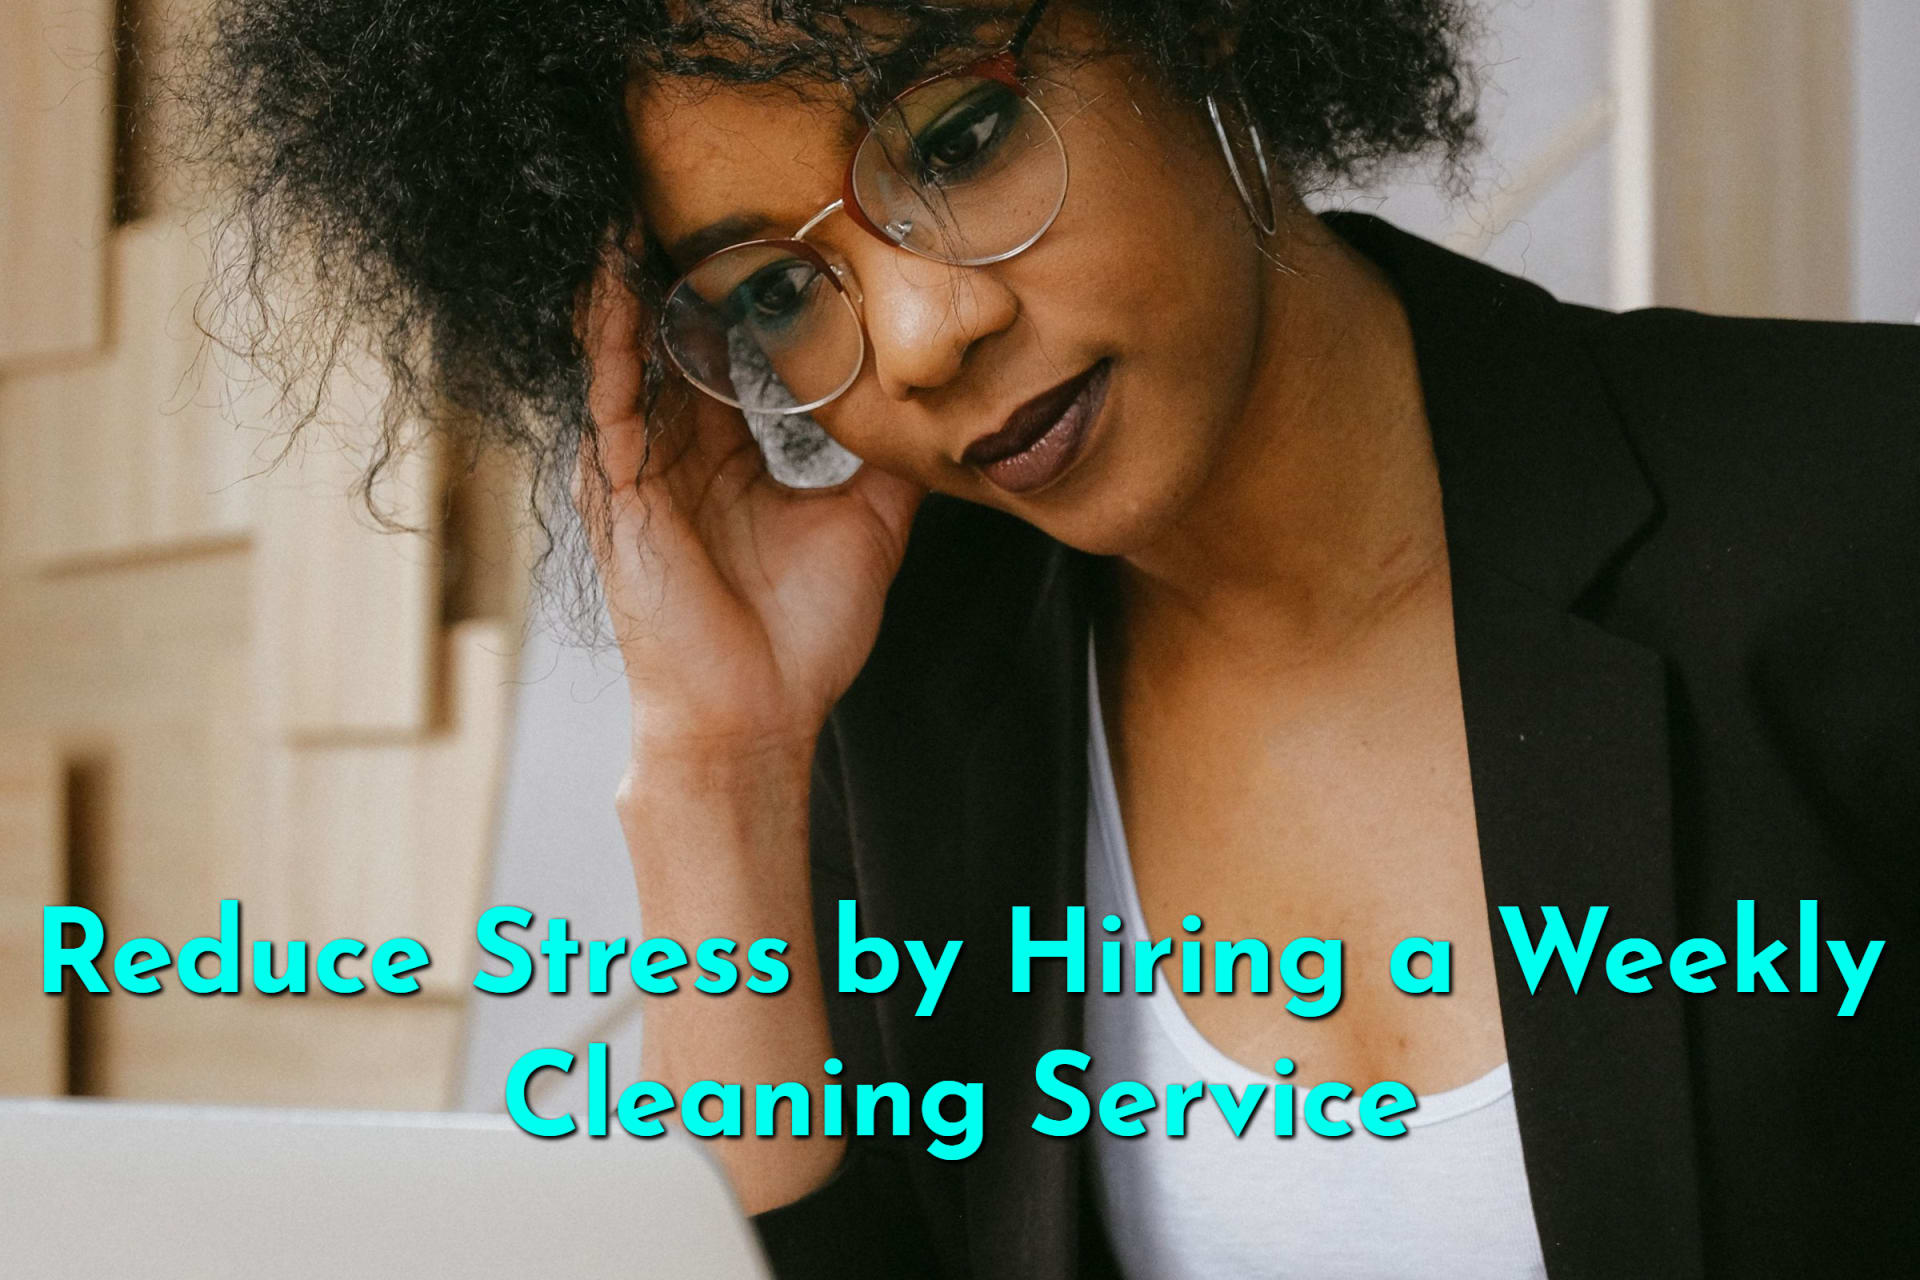 Reduce Stress by Hiring a Weekly Cleaning Service